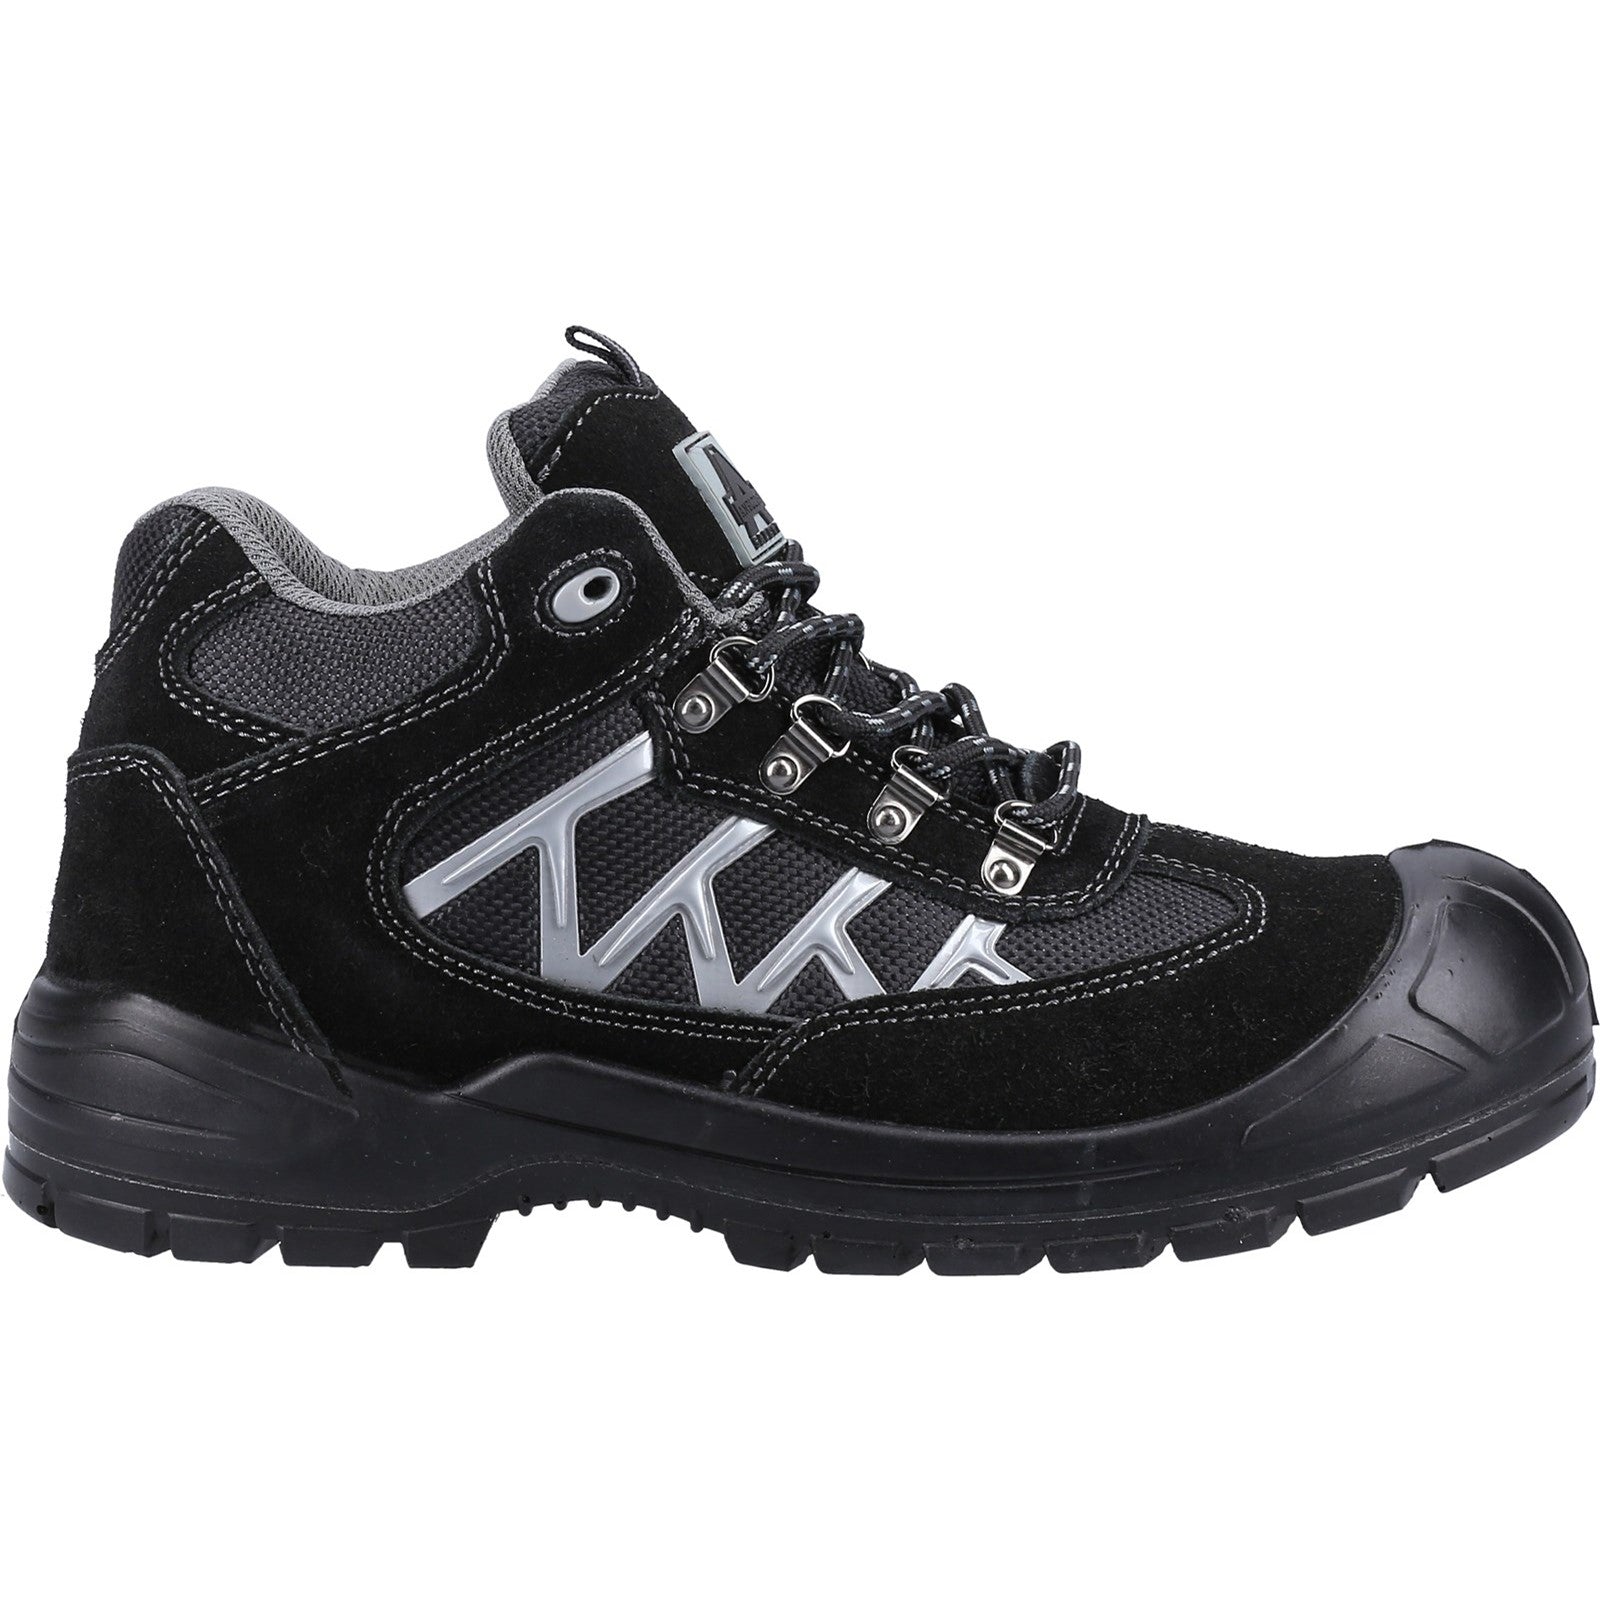 Amblers 255 Safety Boot